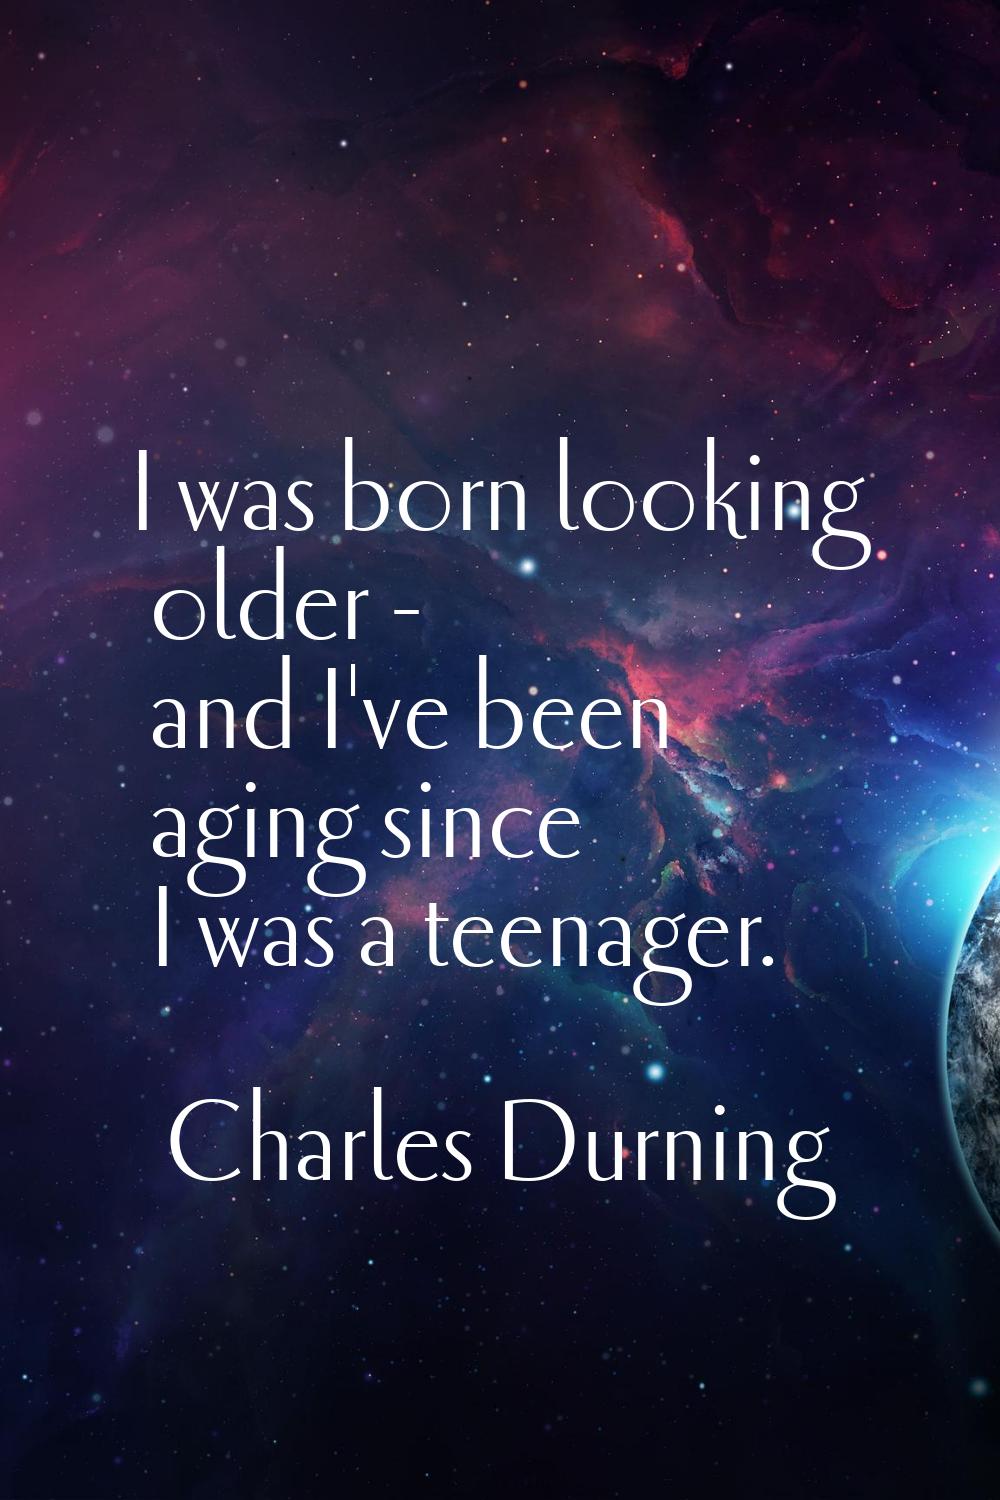 I was born looking older - and I've been aging since I was a teenager.